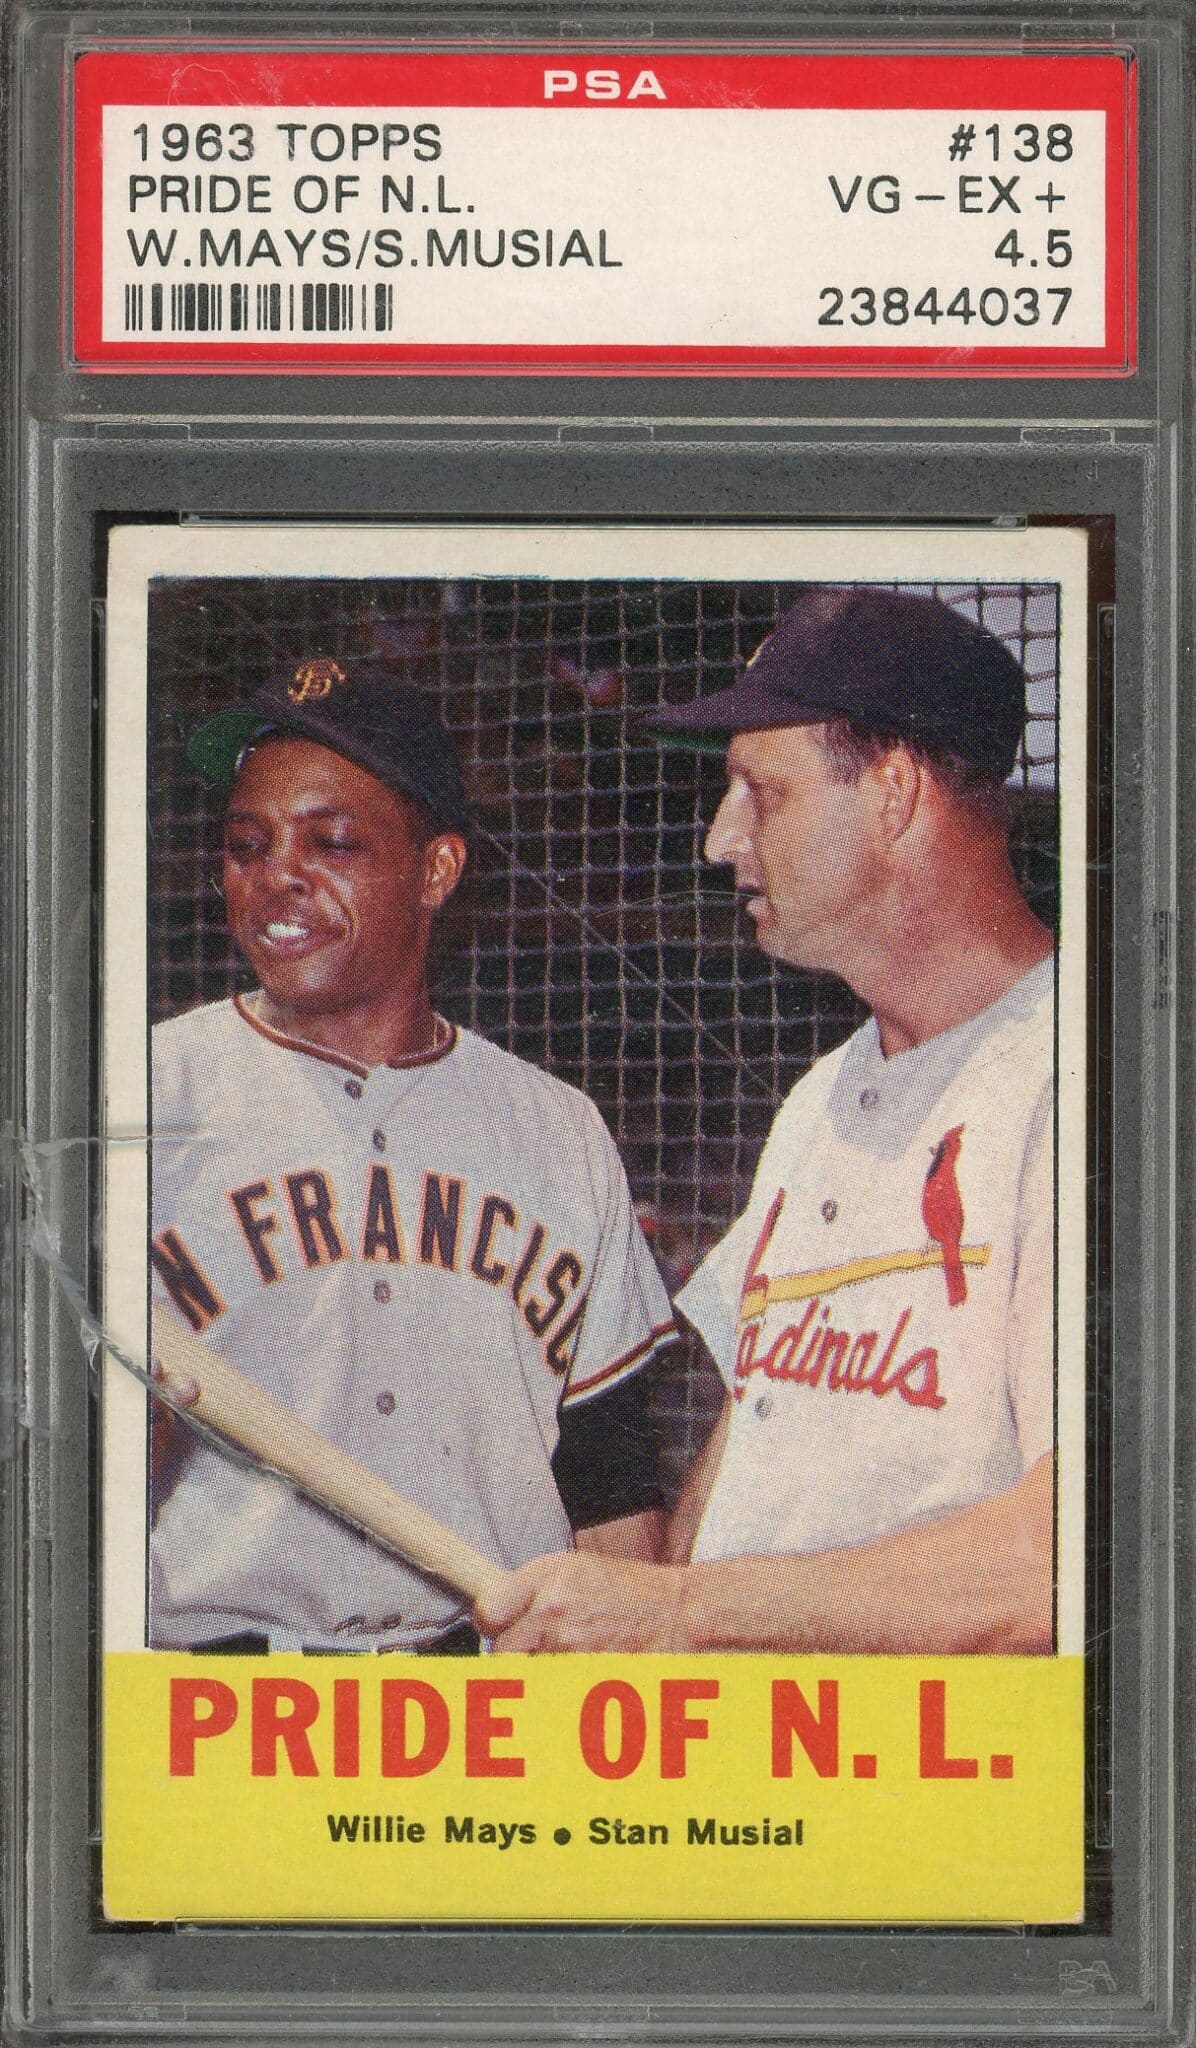 Willie Mays, Stan Musial 1963 Topps Pride of NL Baseball Card #138 - Graded  VG-EX+ 4.5 (PSA) - Please see description